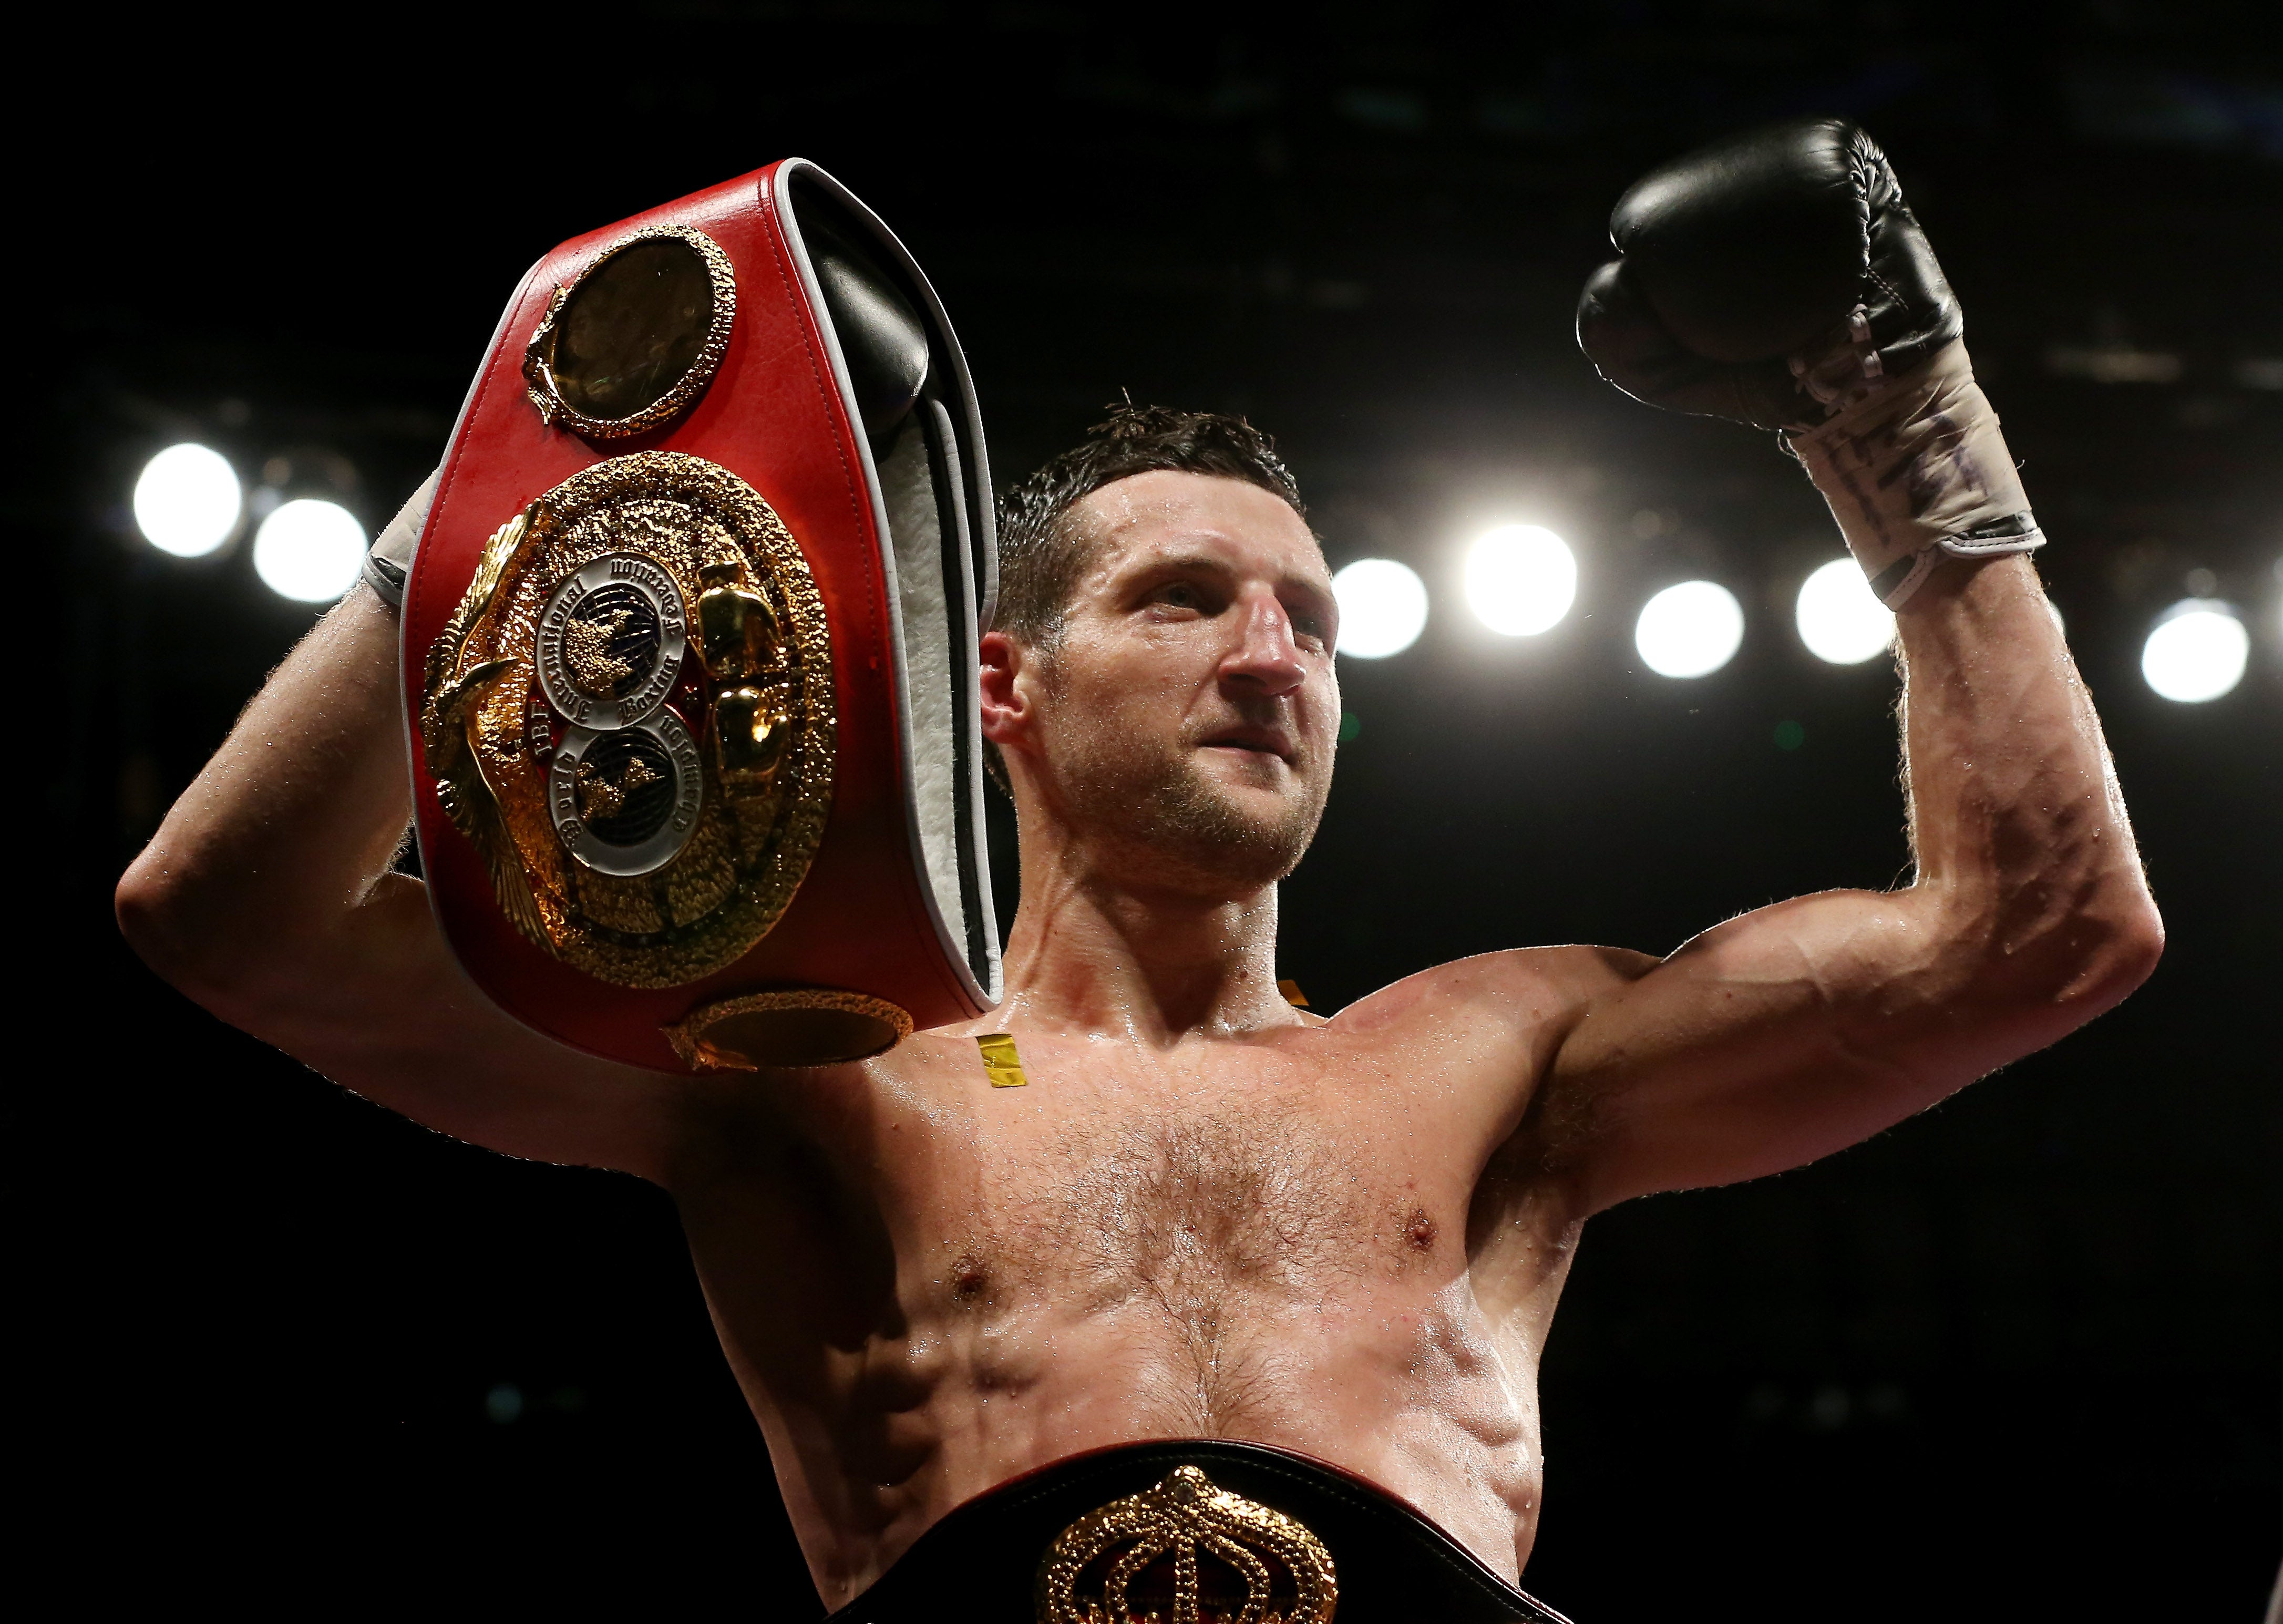 Froch is a former super middleweight champion